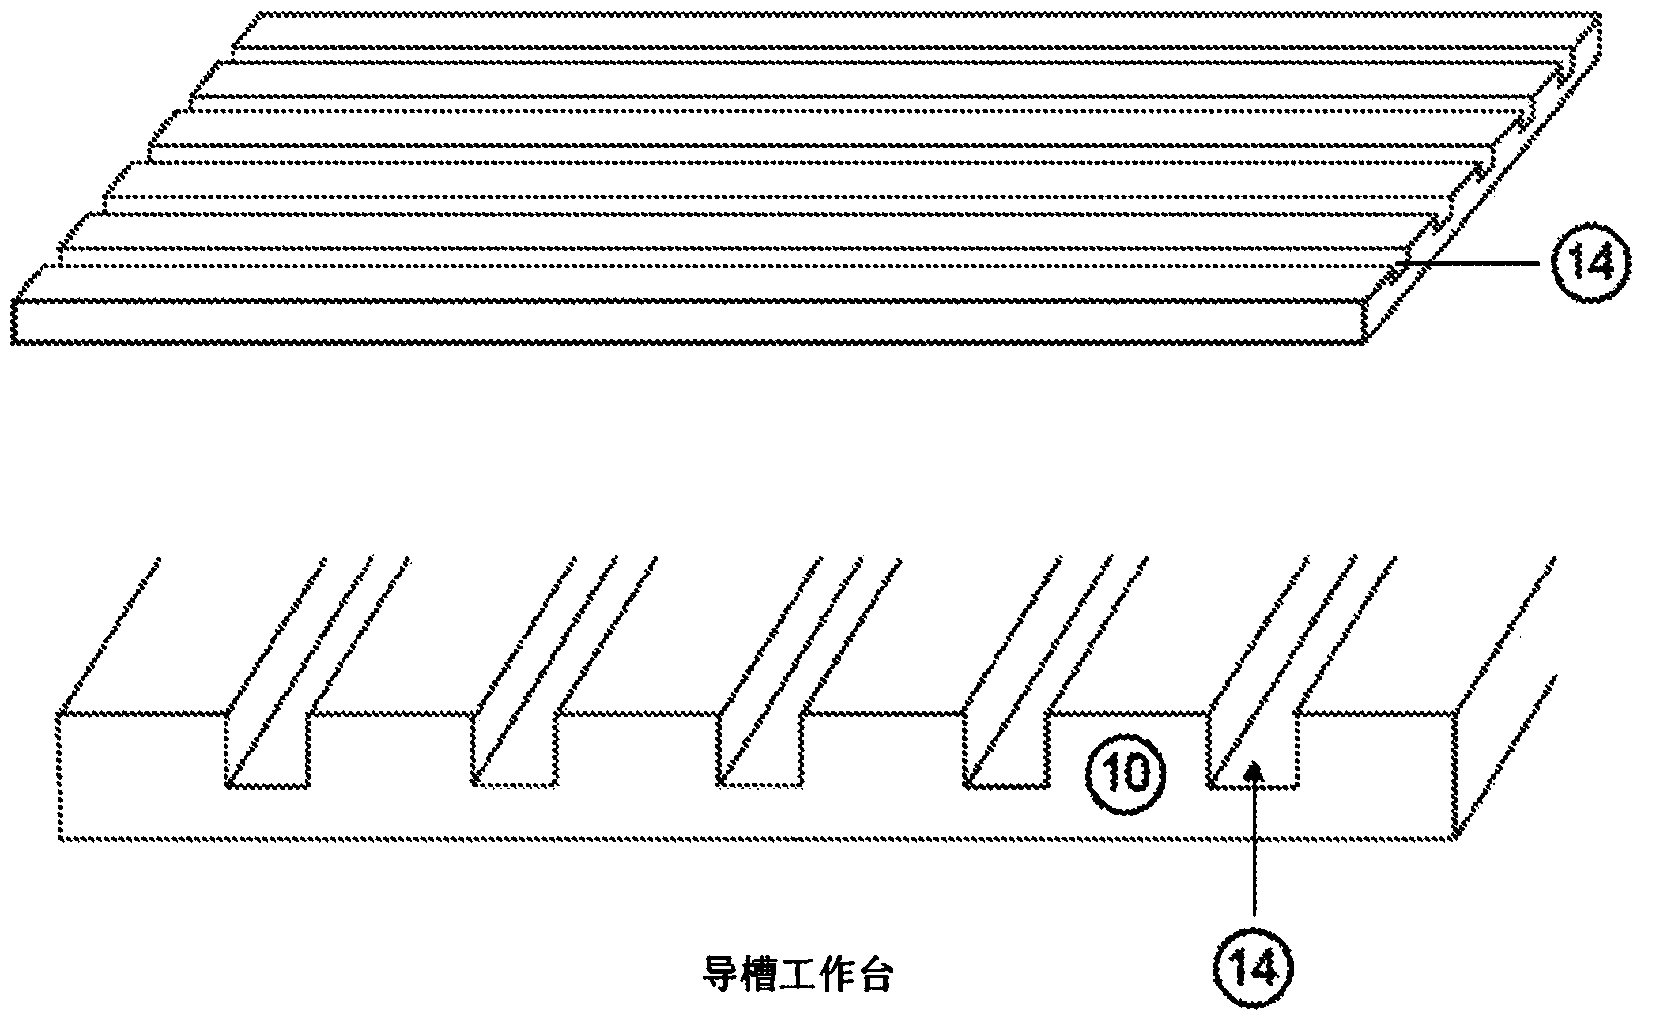 A method for the surface application of chemical compounds to both synthetic and natural fibers and a system for same